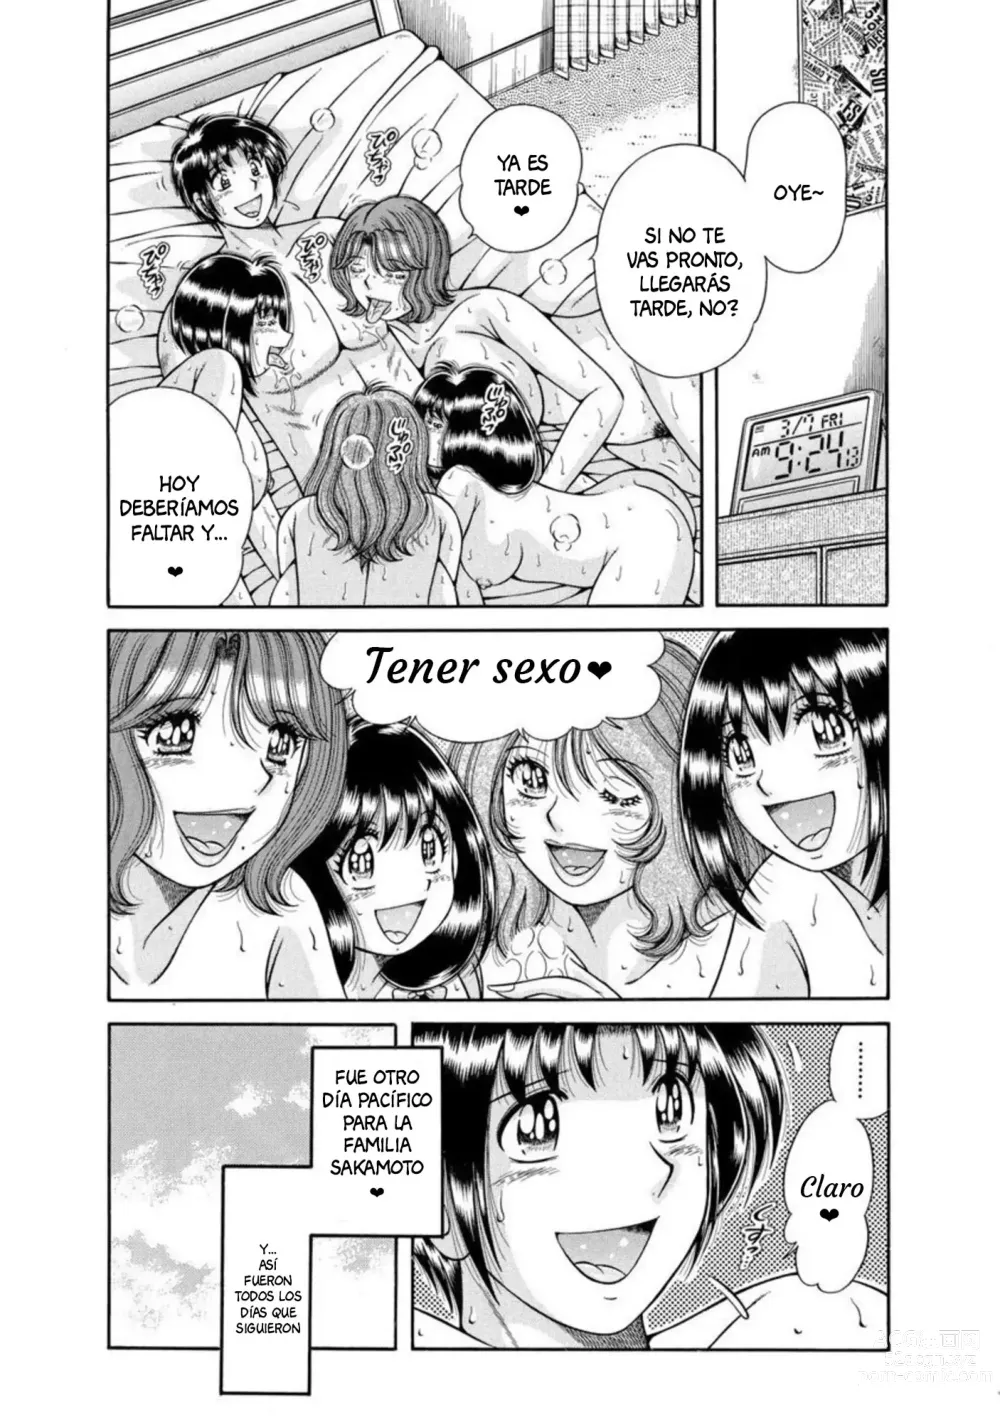 Page 20 of manga Mother and Big and Little Sisters. As Much Sex as You Want, Every Day, With All 5 of Them. Part 1